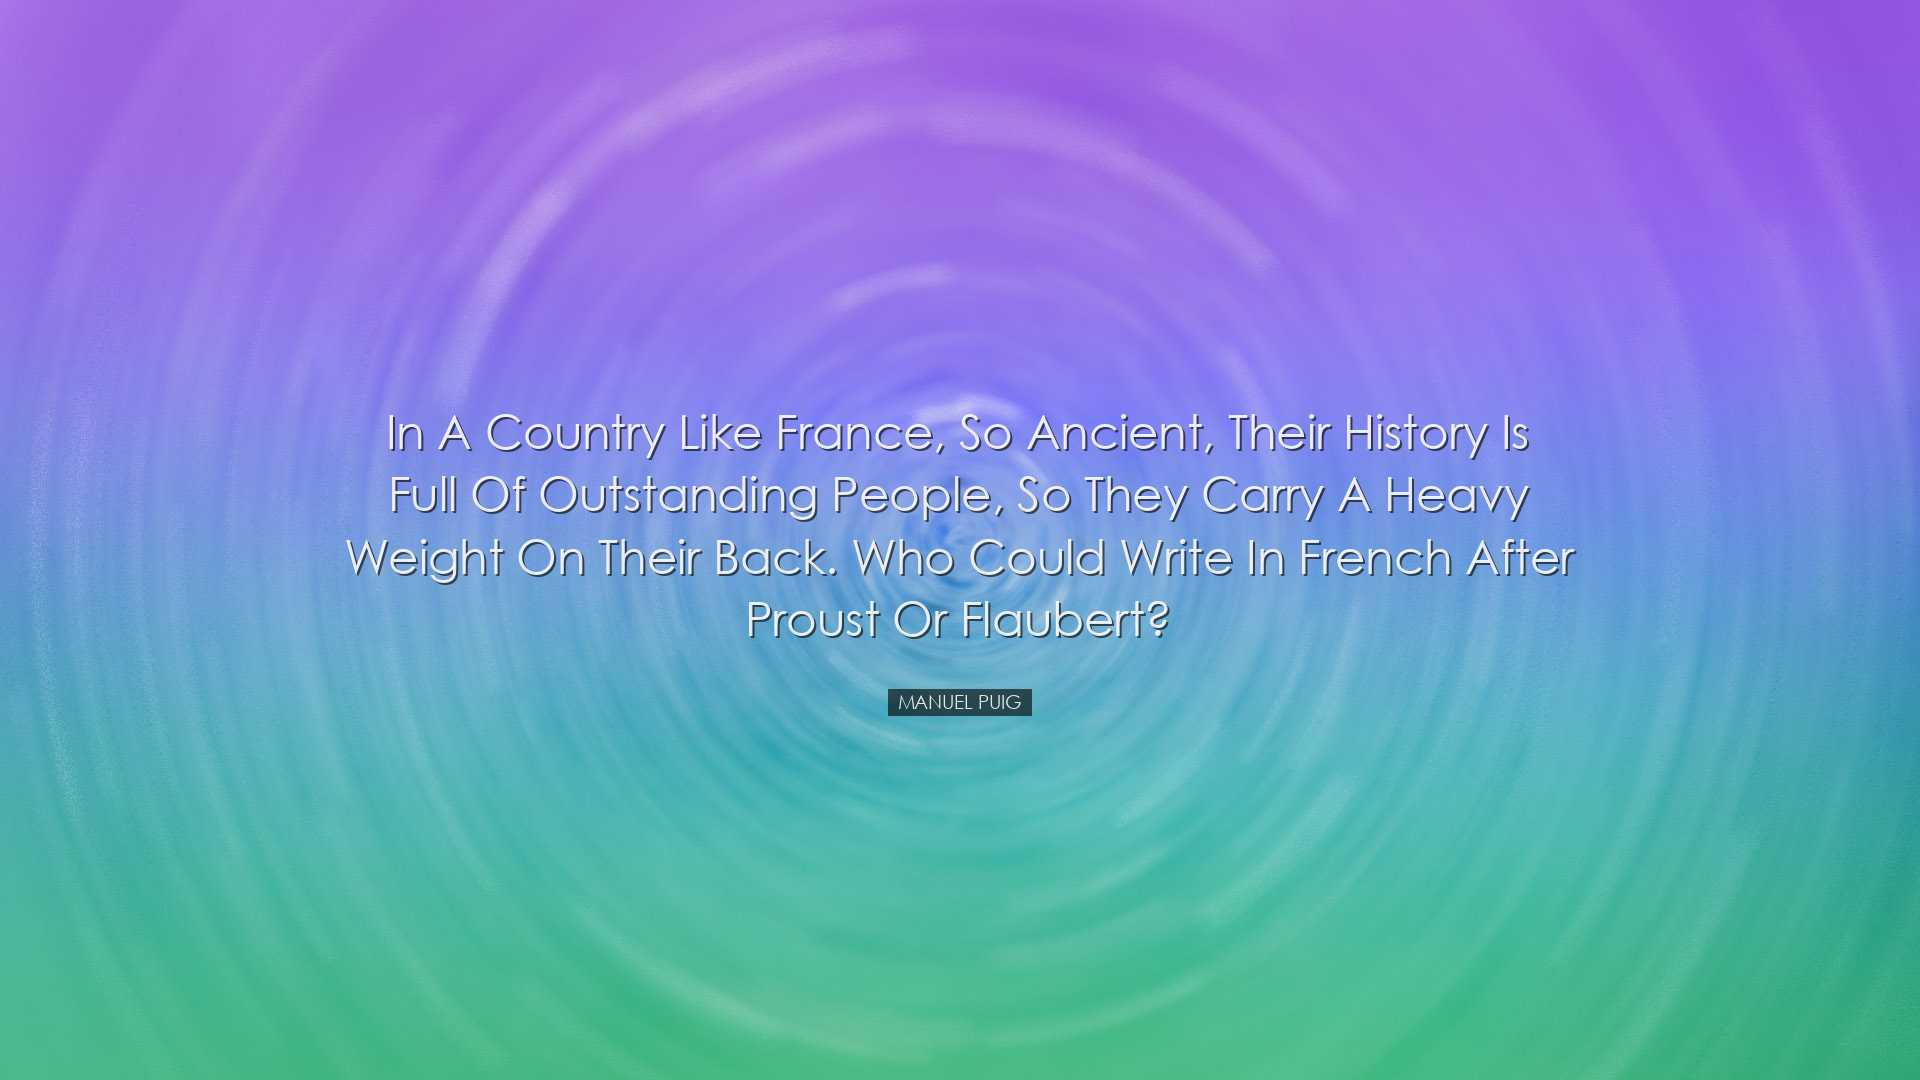 In a country like France, so ancient, their history is full of out